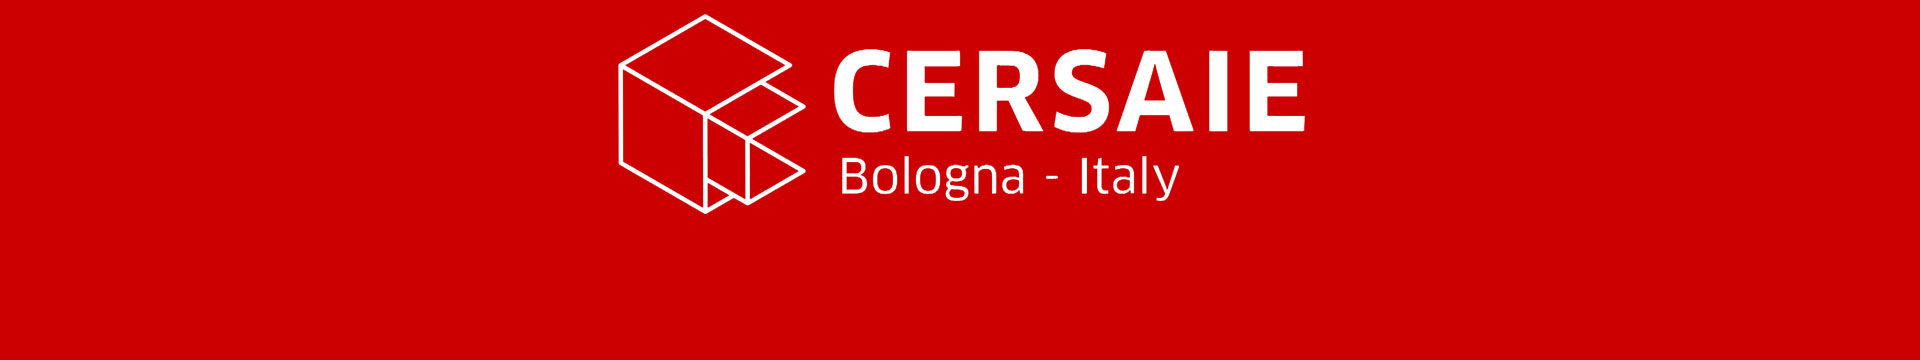 CERSAIE 2019 trends and news. Our impressions